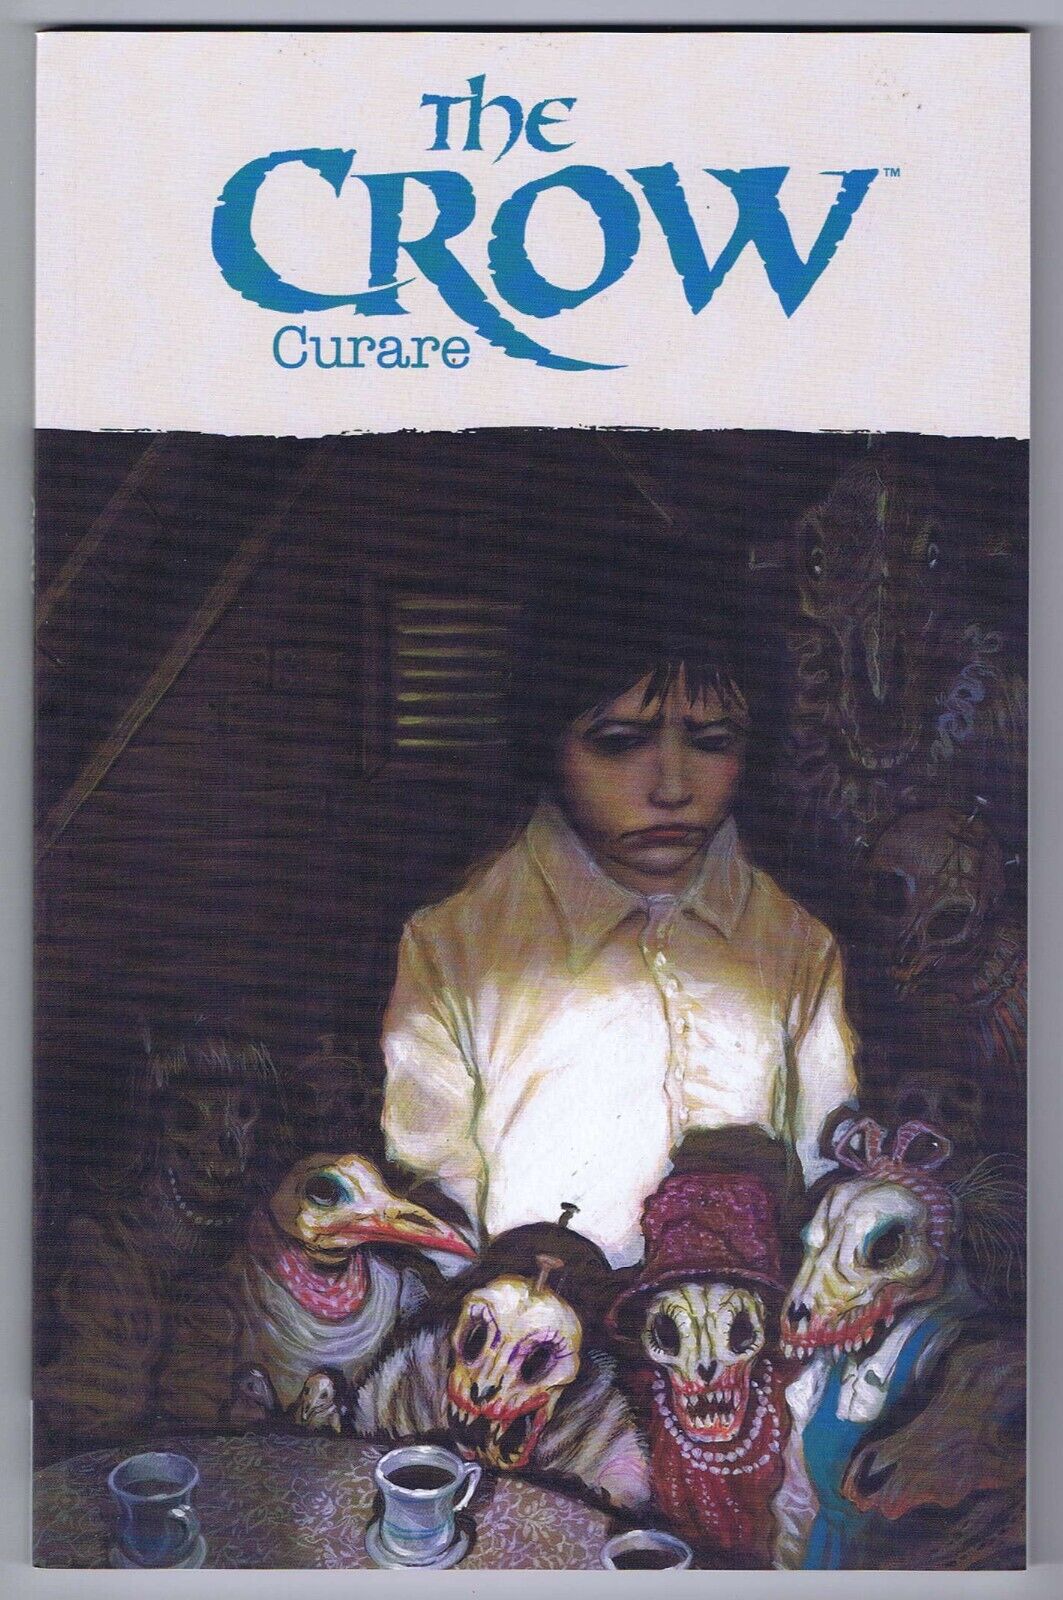 The Crow Curare Trade Paperback NM 1st Print NOS 2013 IDW Publishing